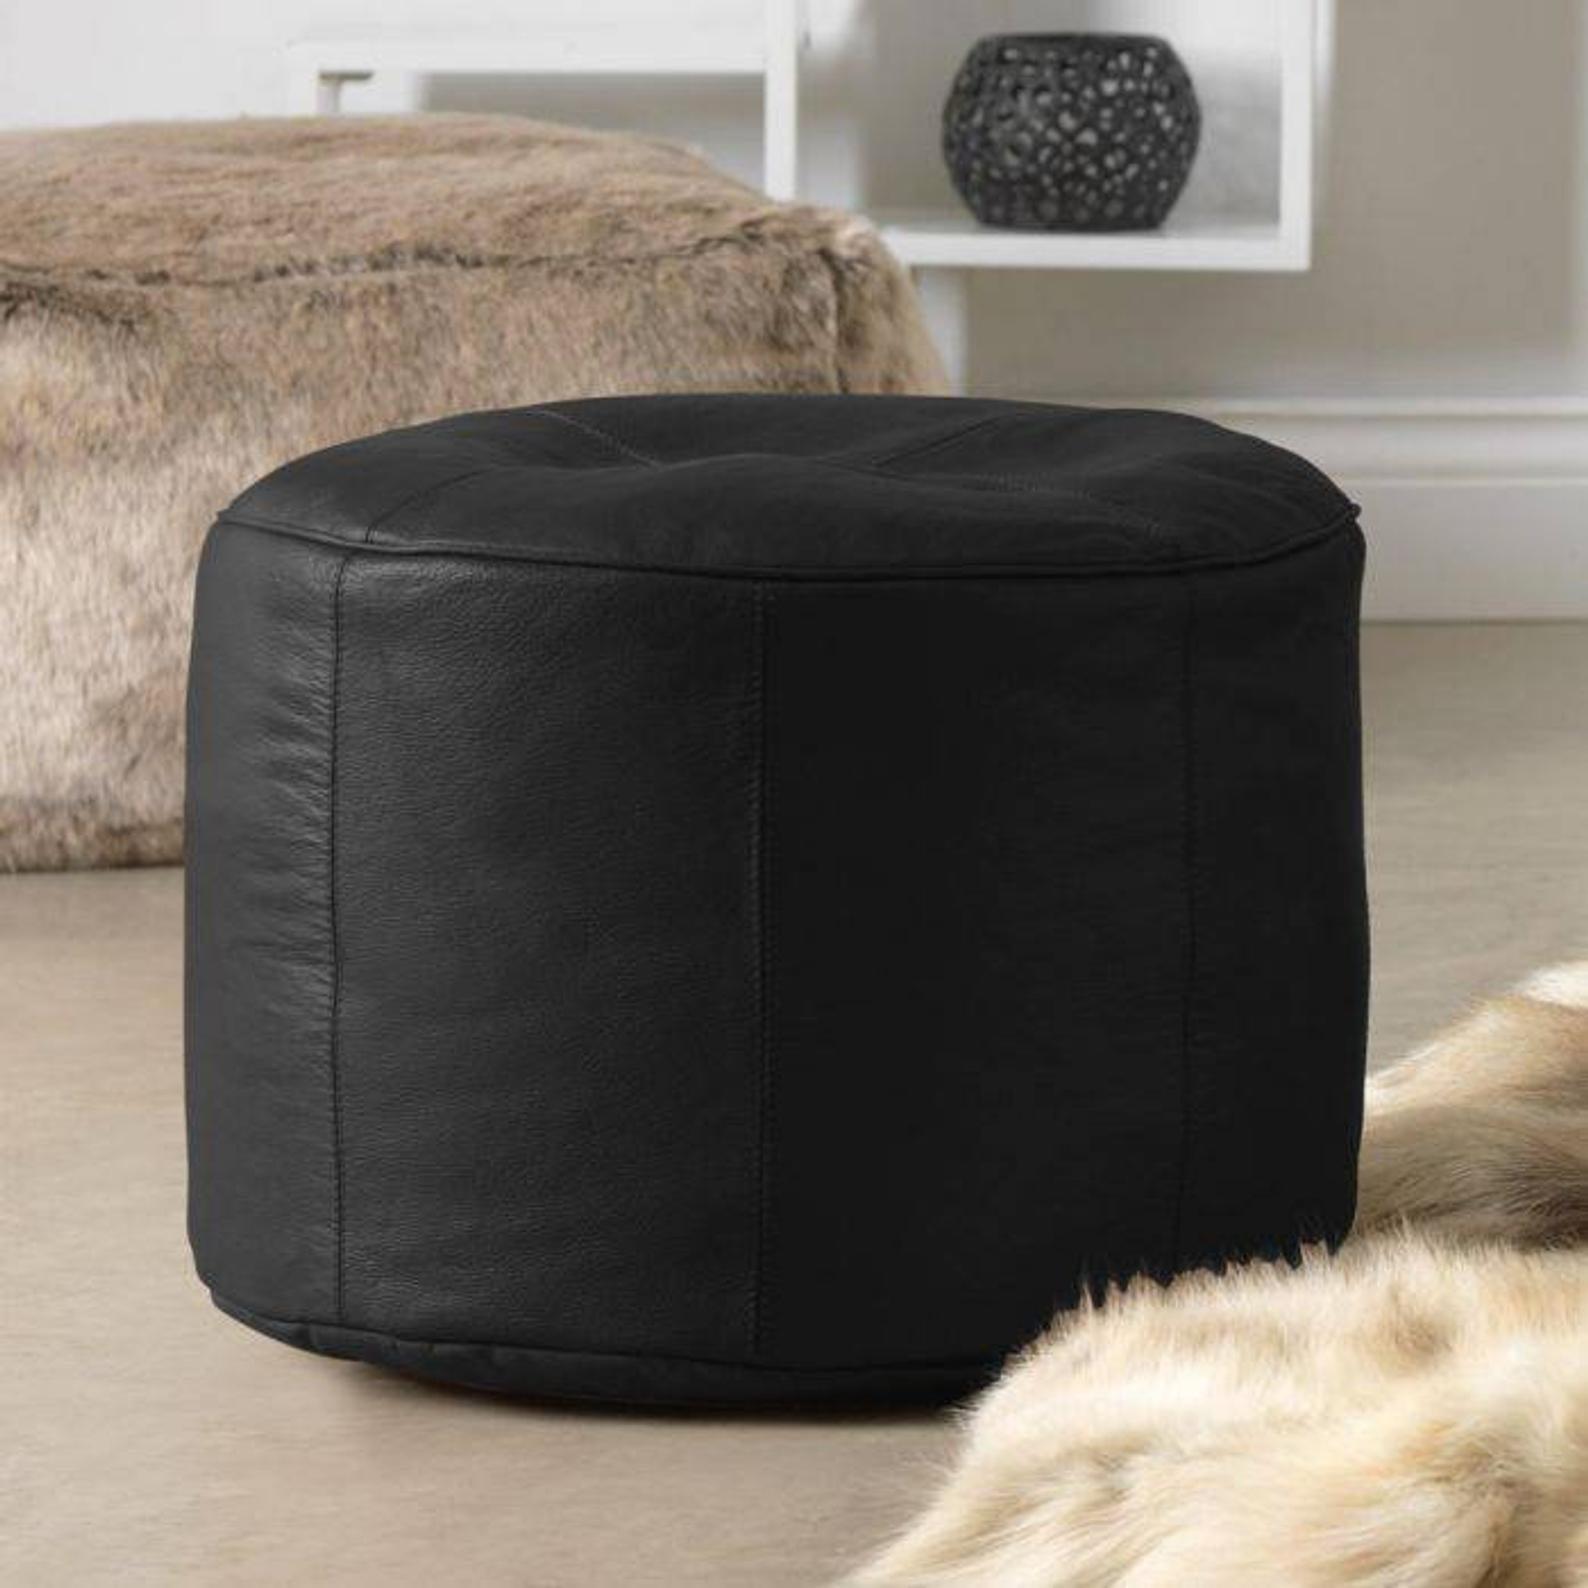 Genuine Cowhide Leather Ottoman Pouf Footrest Black freeshipping - SkinOutfit